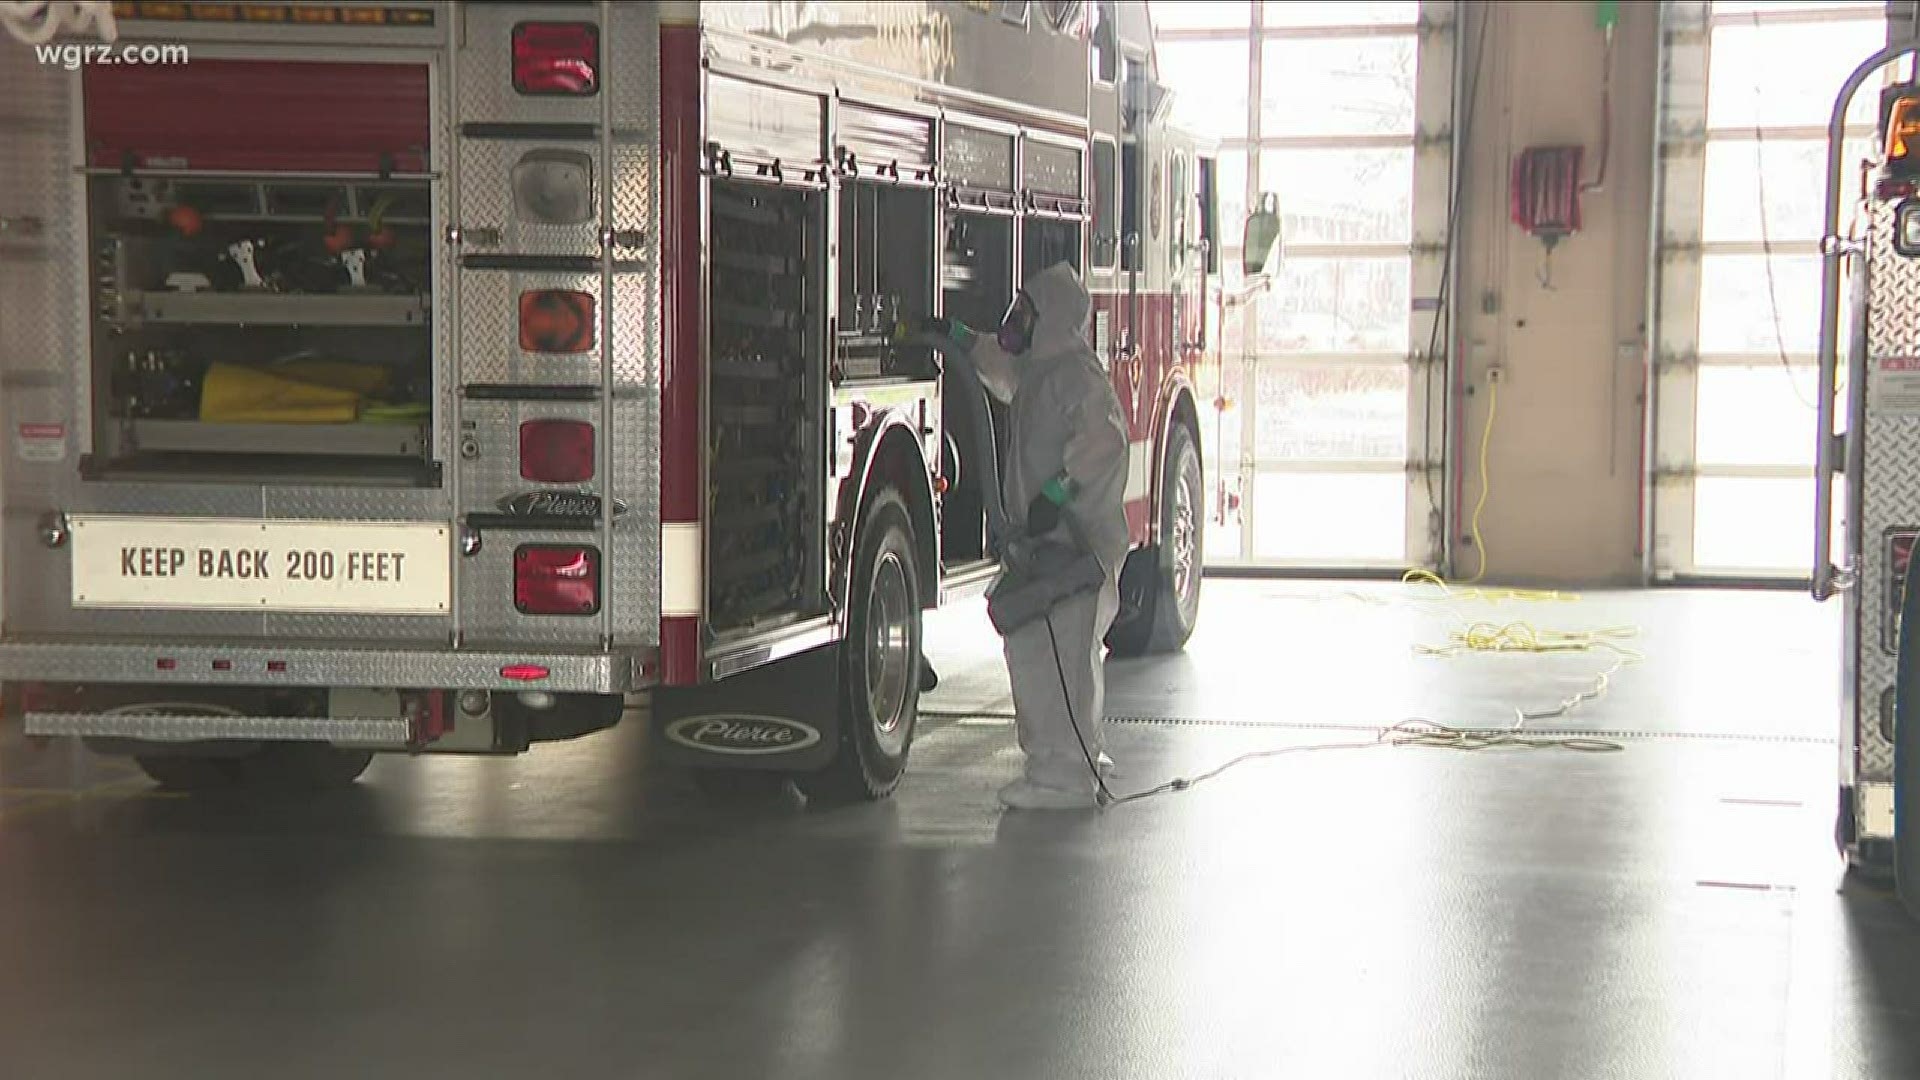 The folks at Western New York disaster relief in Collins have been going around disinfecting fire halls and equipment around the area for free.